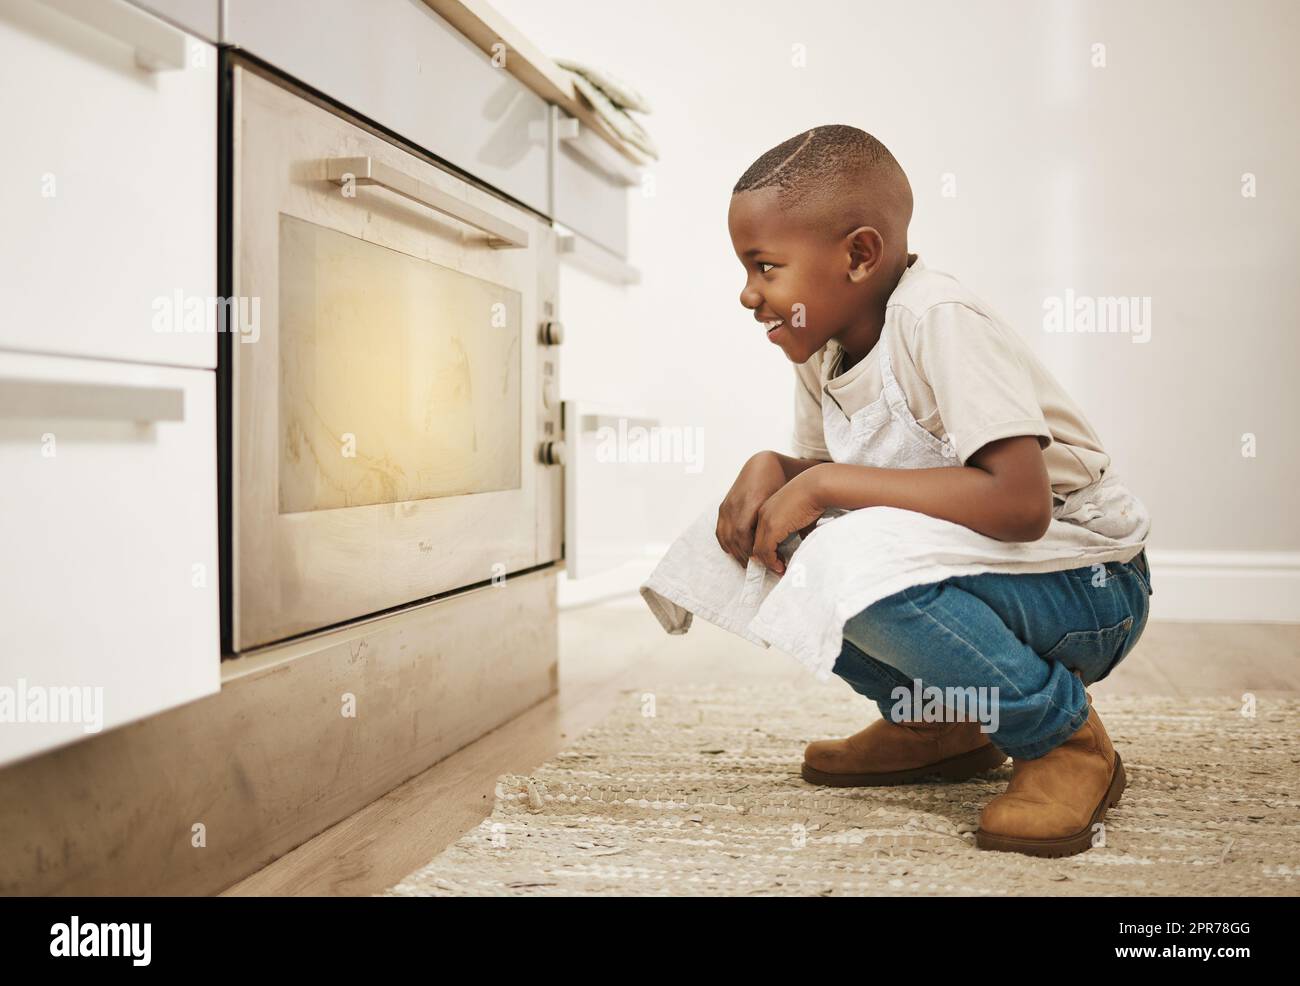 Cant wait to taste these. Shot of a little boy watching his baked goods cook in the oven at home. Stock Photo